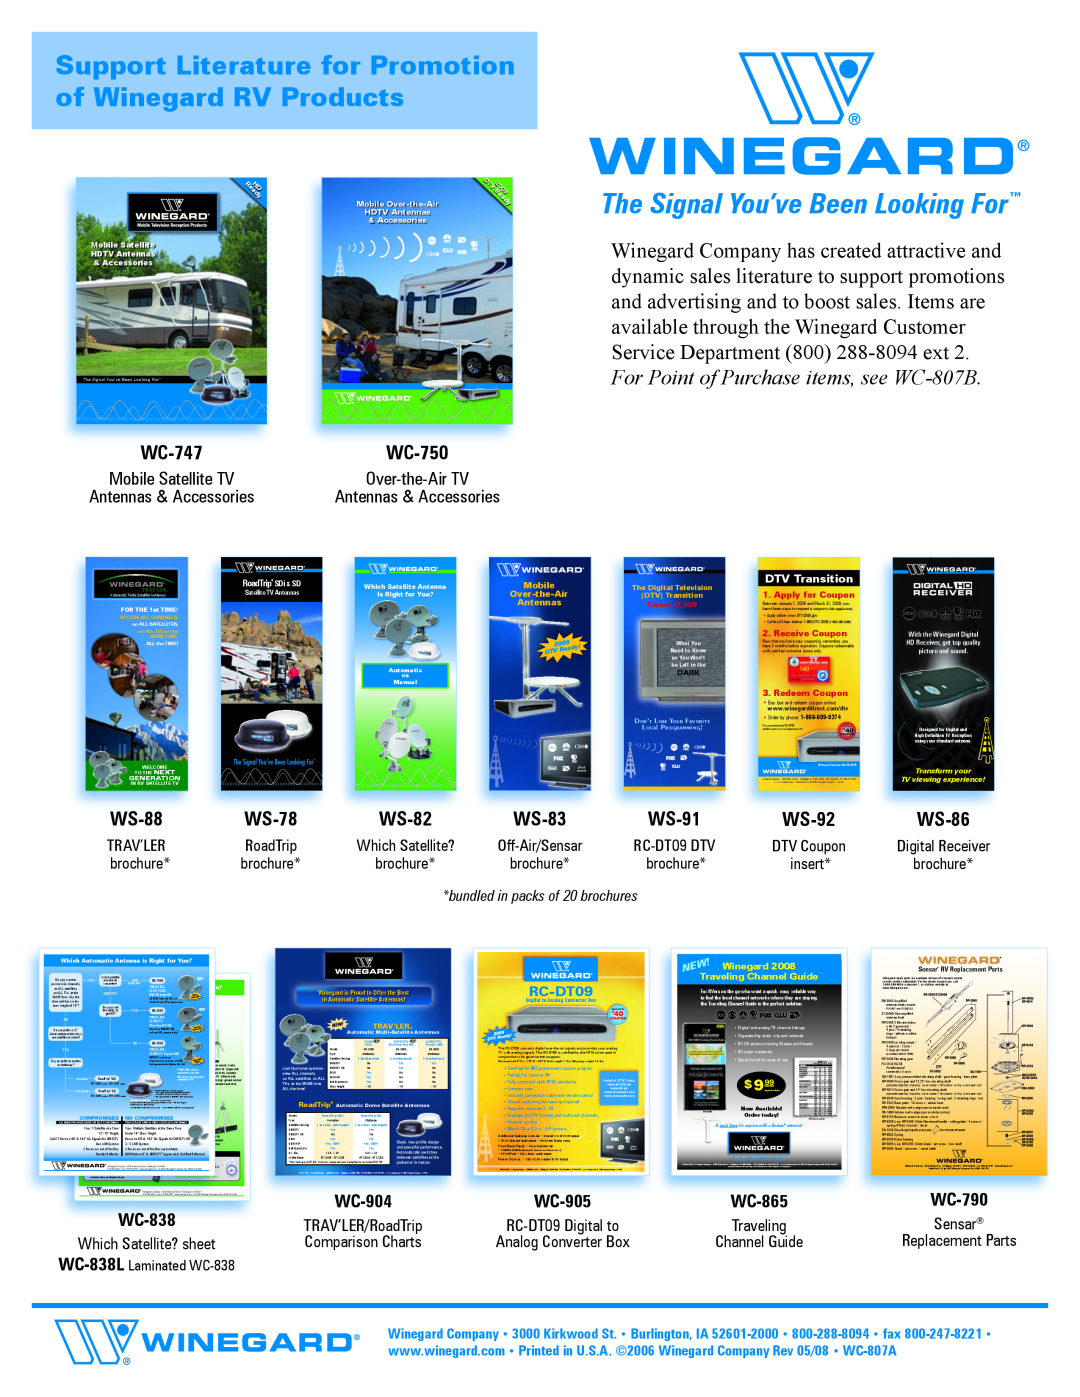 Winegard WC-82 dimensions Support Literature for Promotion of Winegard RV Products, The Signal You’ve Been Looking For 